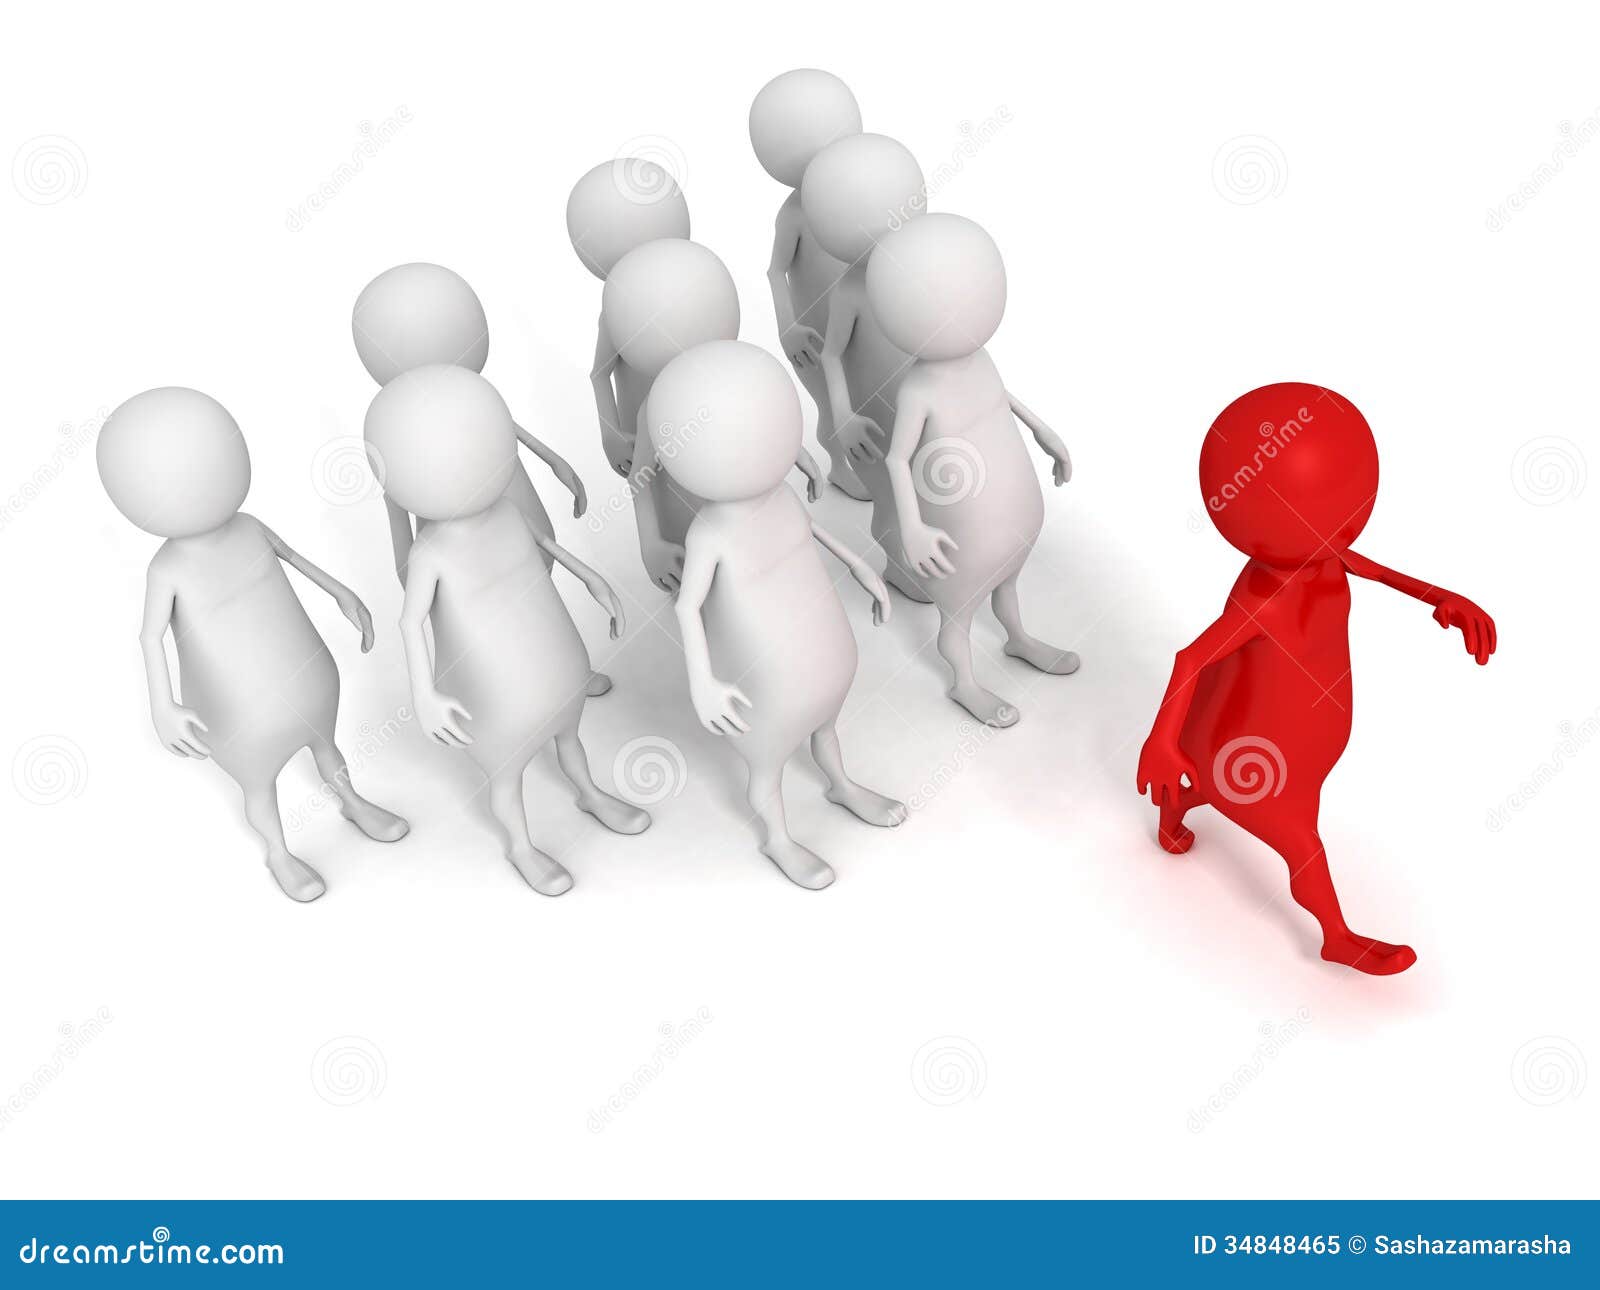 leadership clipart free download - photo #14